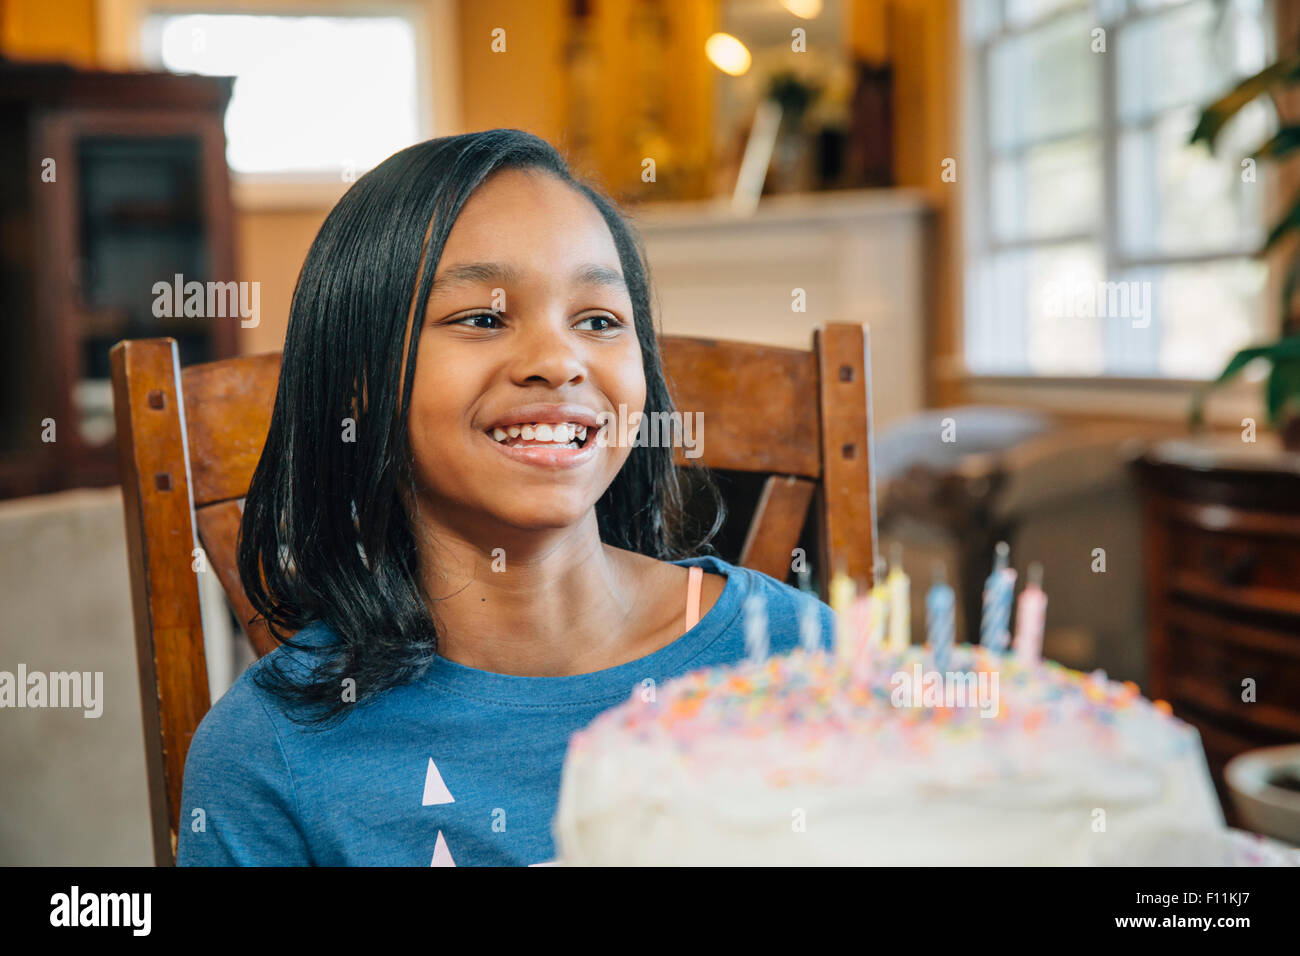 Black girl blowing out candles on birthday cake Stock Photo - Alamy